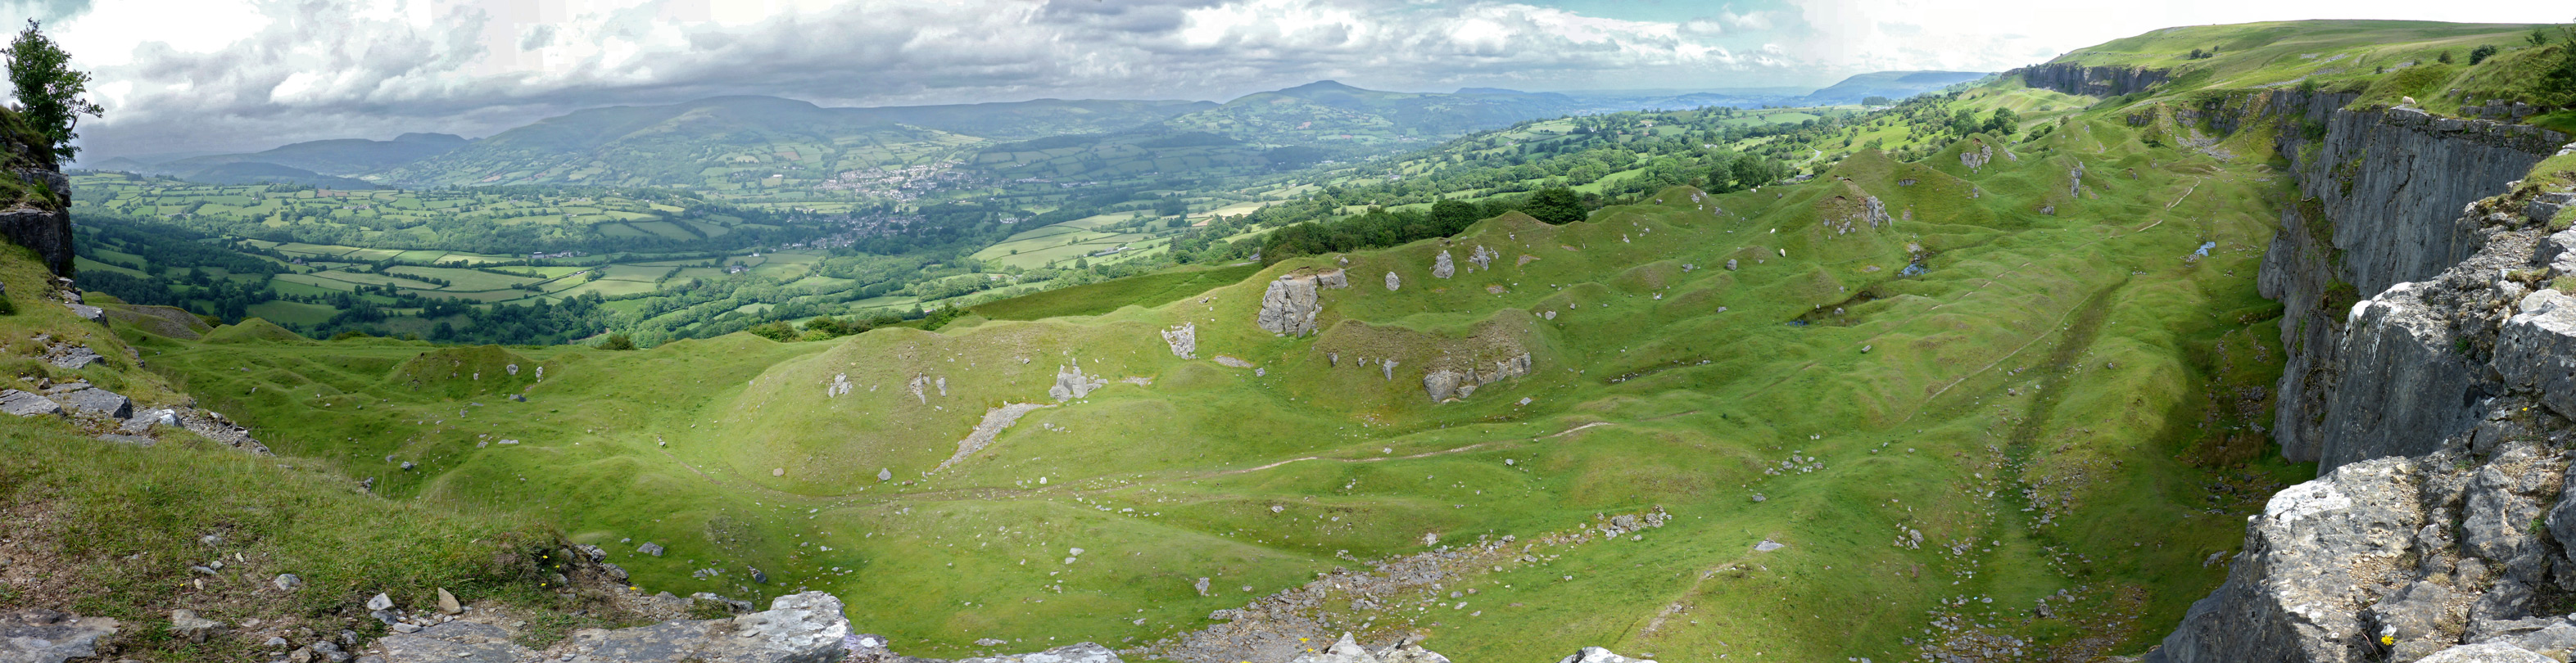 Panorama of the quarries